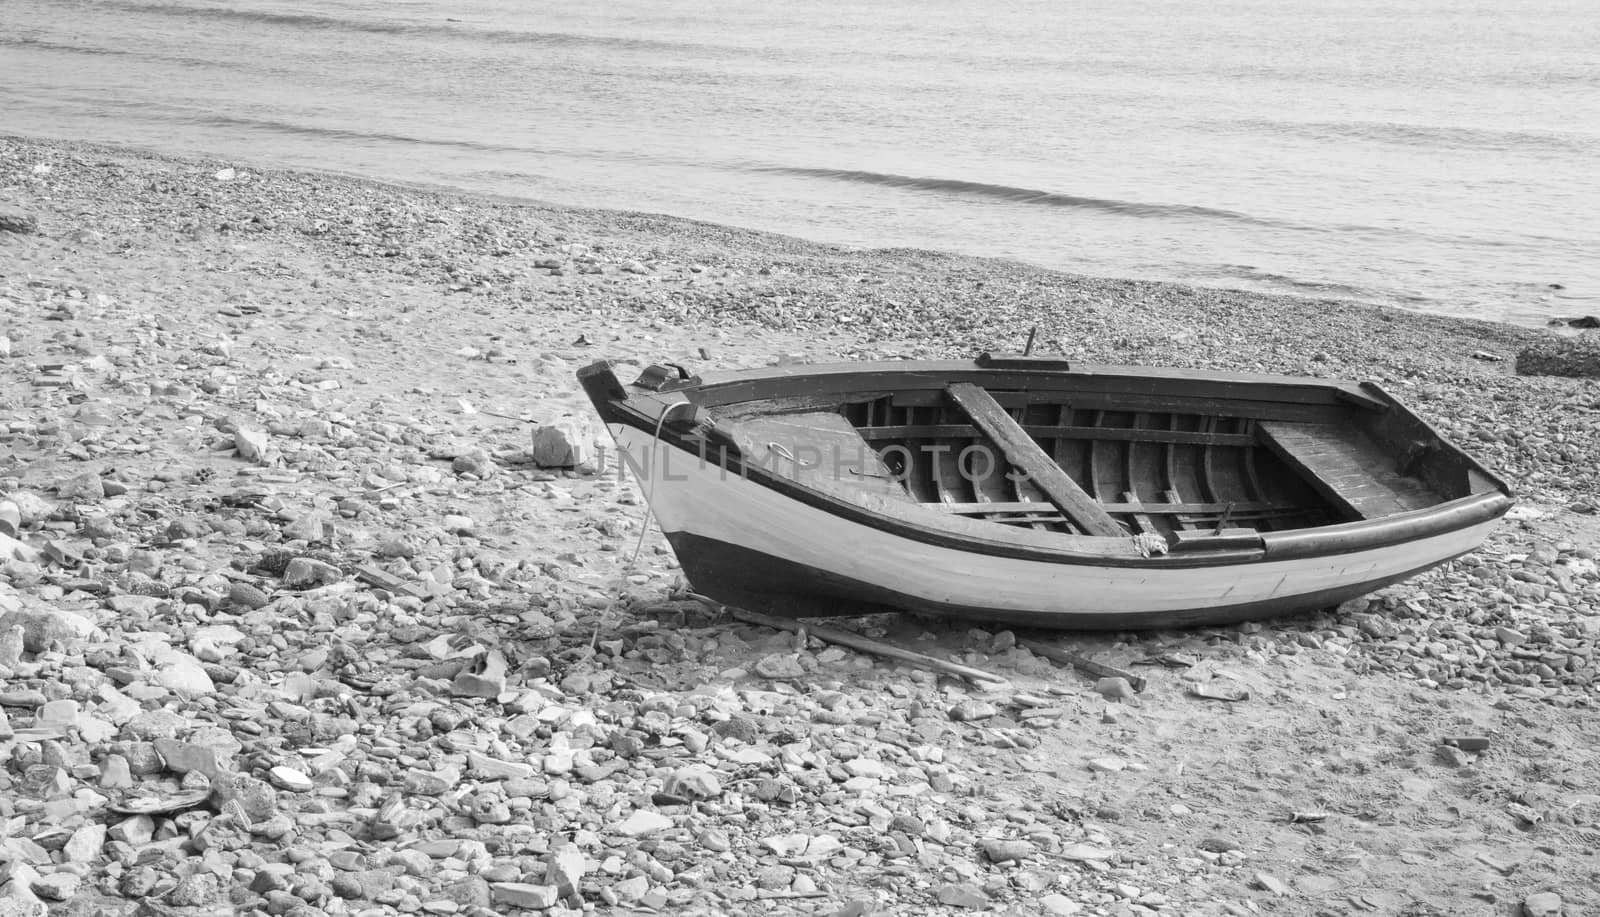 Fisherman's boat at the seaside in blach and white